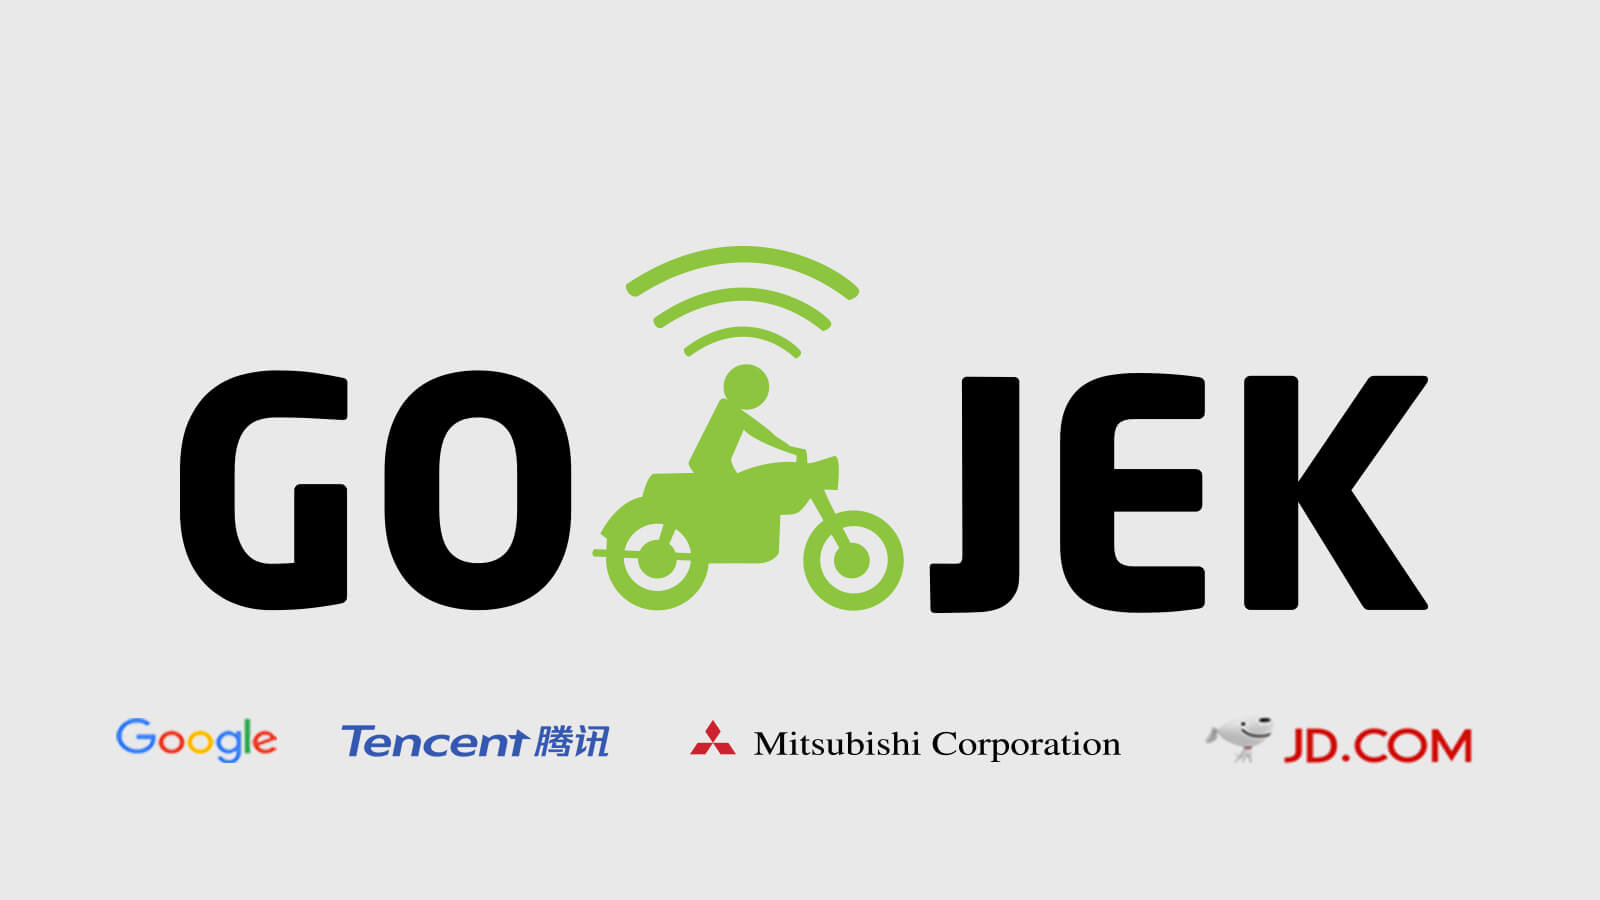 Google, JD.com, and Tencent lead first closing of Gojek’s Series F funding round